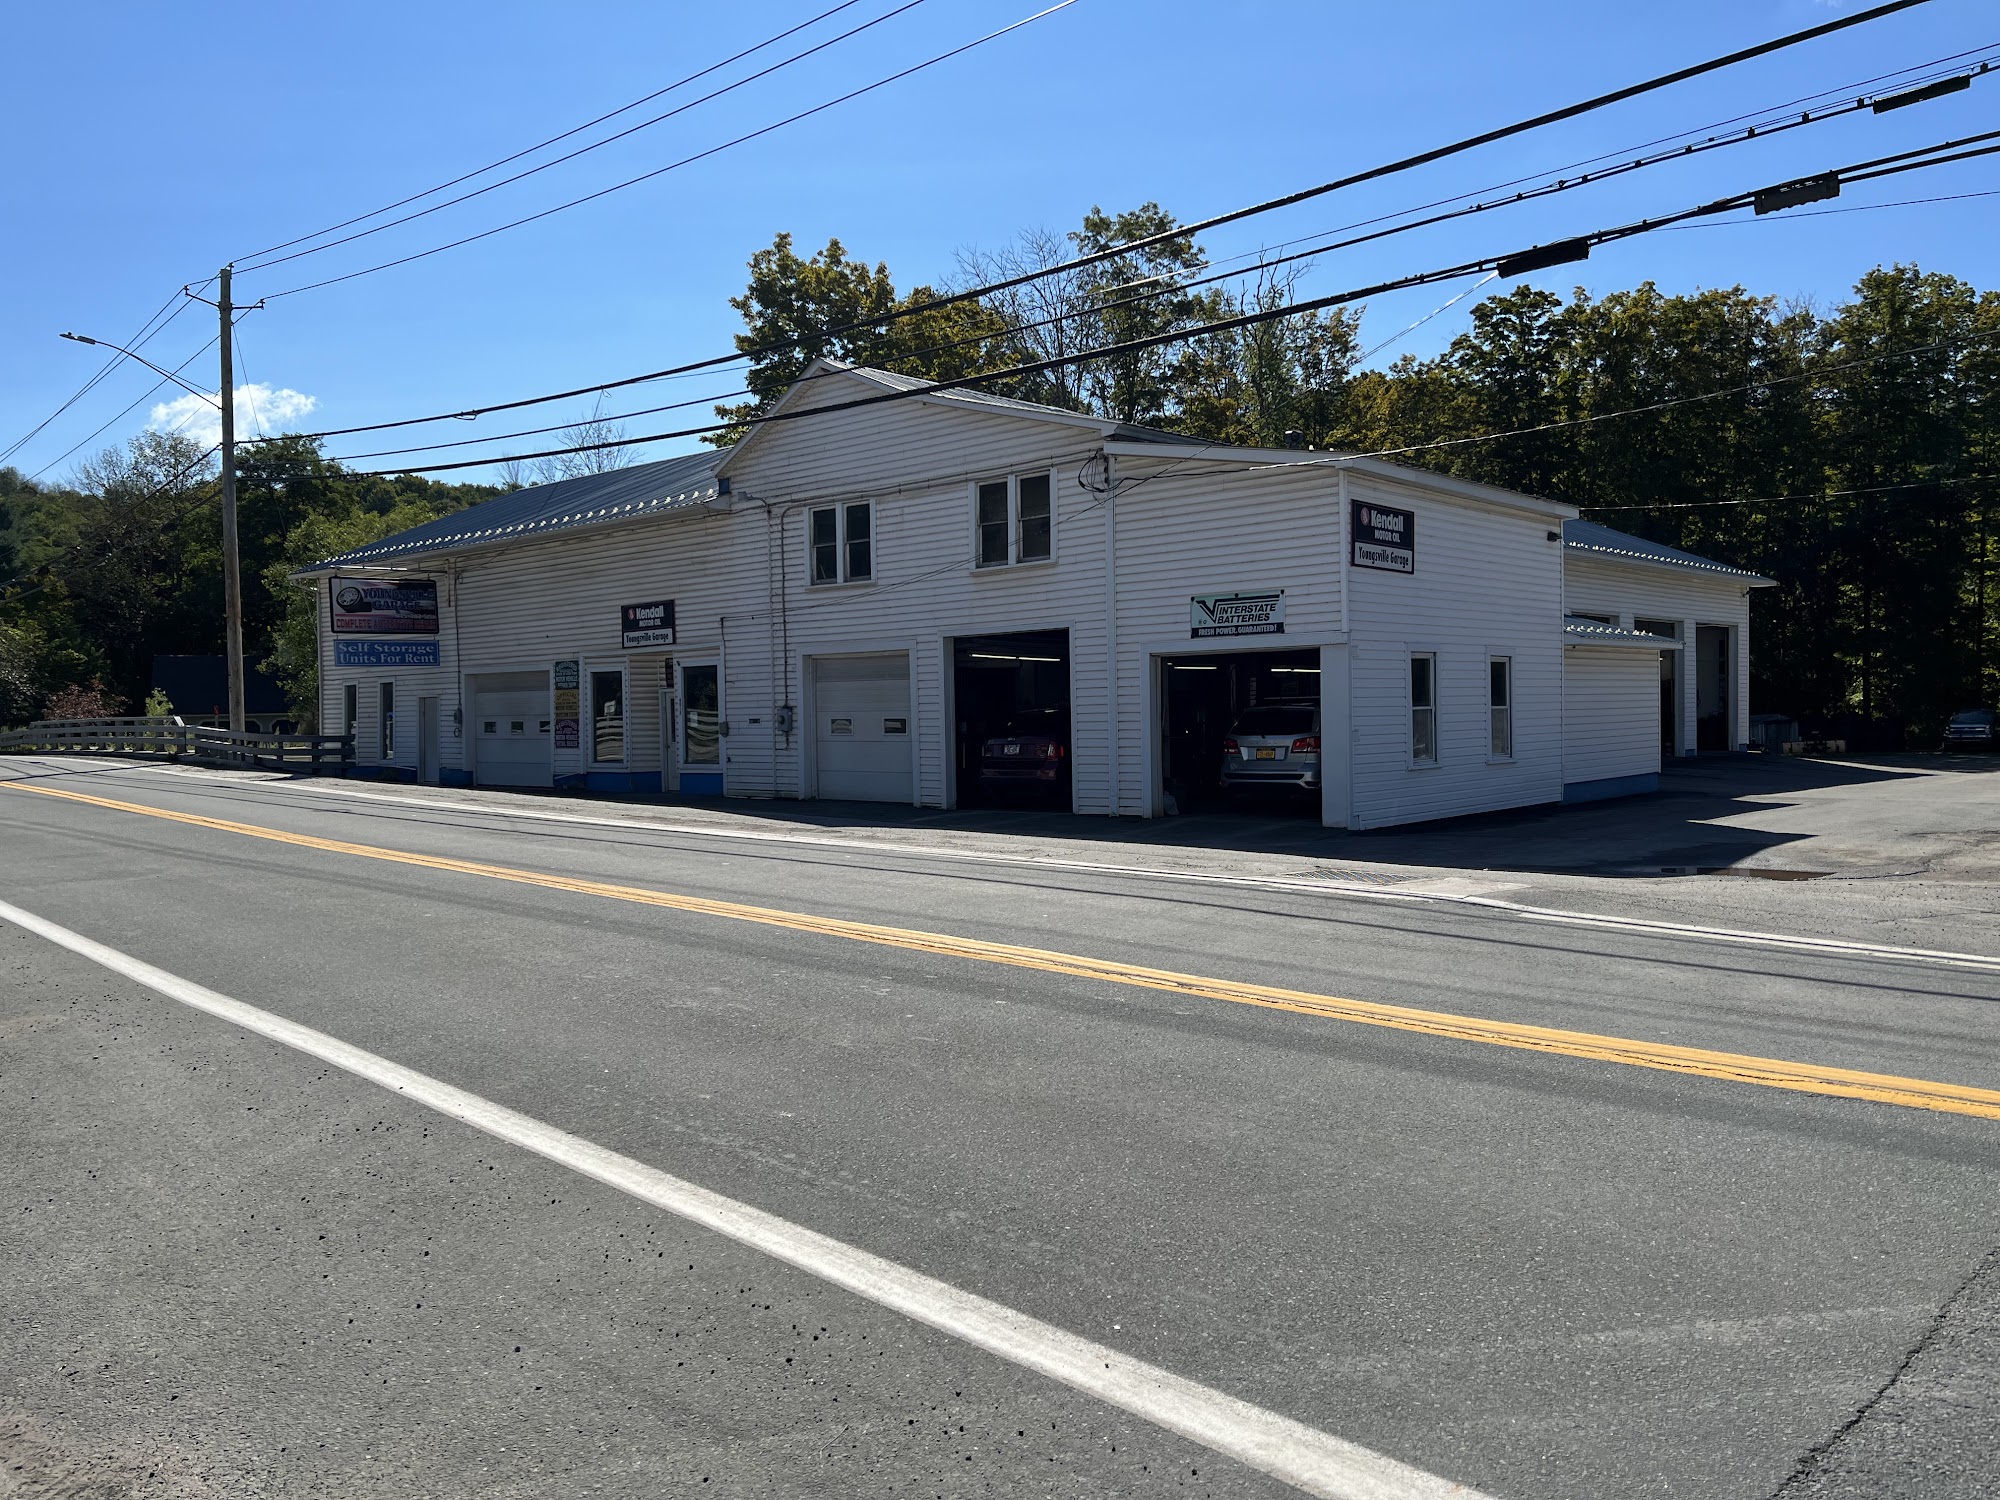 Youngsville Garage 4015 NY-52, Youngsville New York 12791